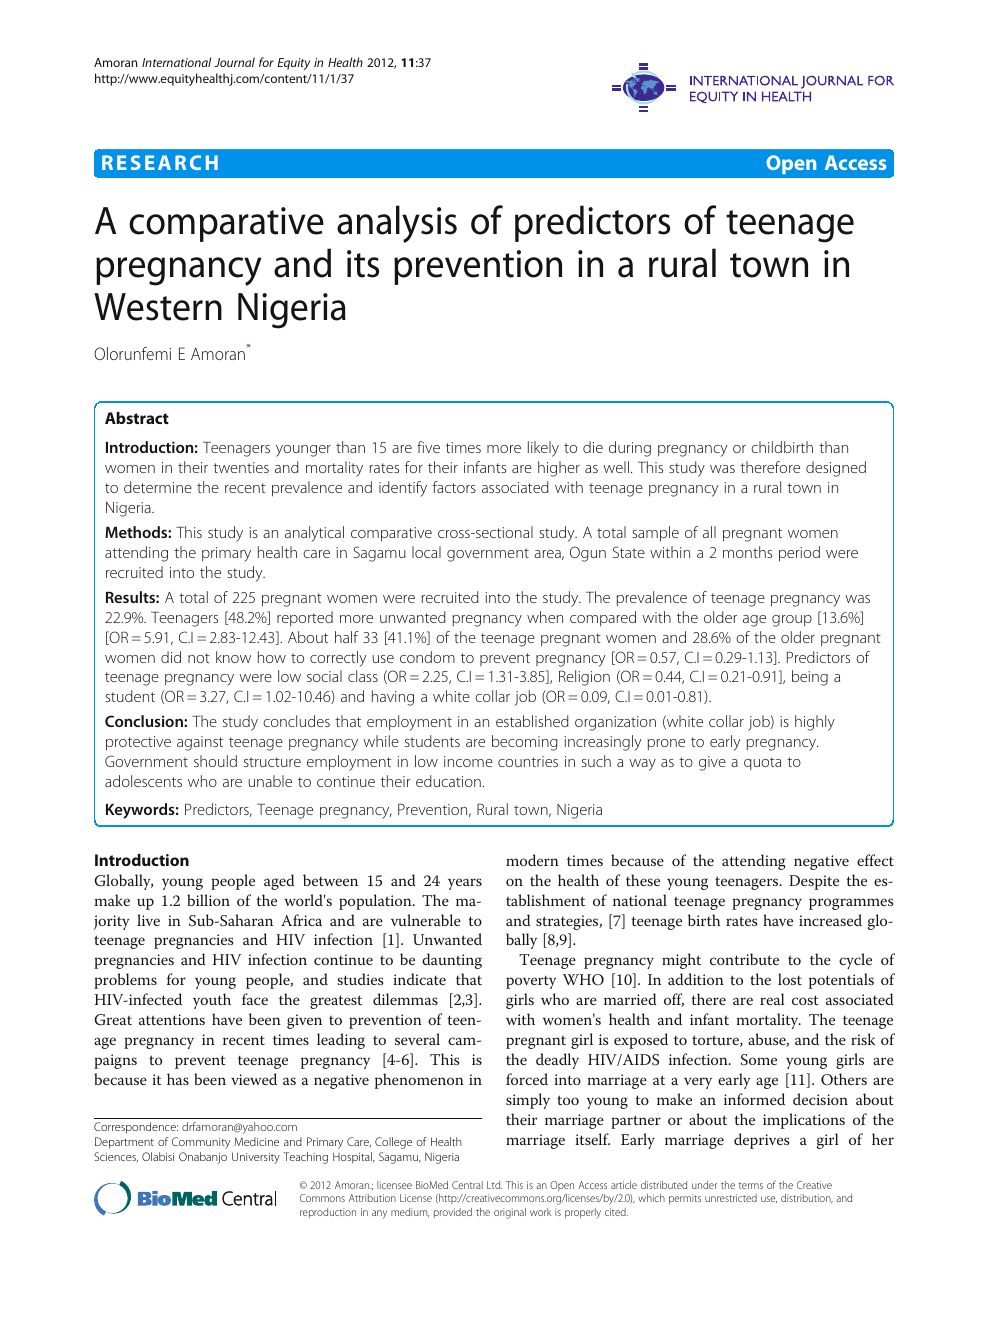 teenage pregnancy background of the study